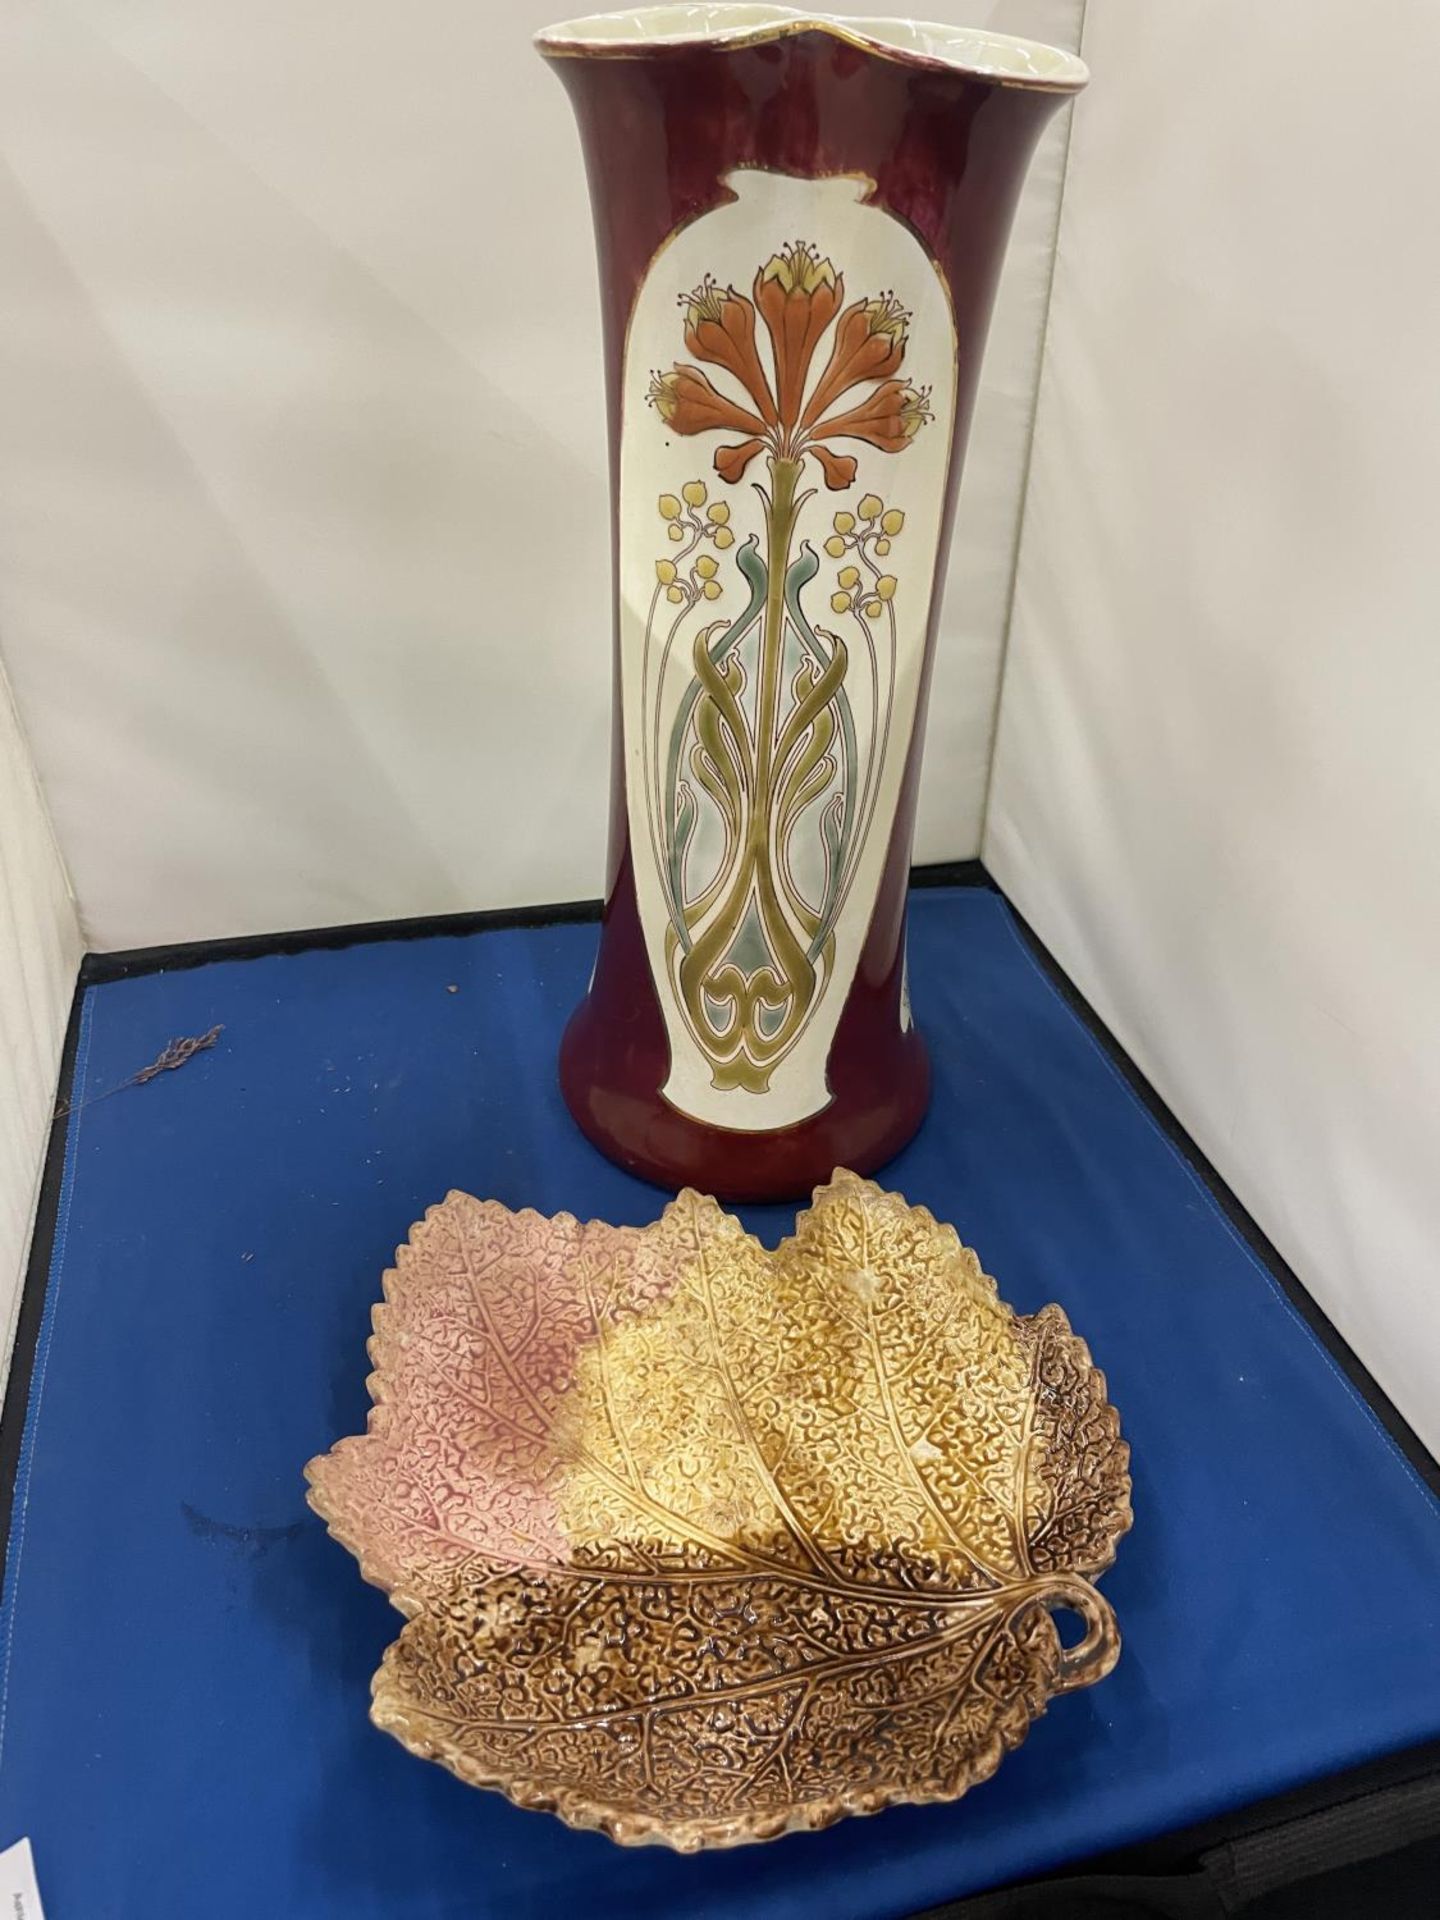 A LATE 19TH EARLY/20TH CENTURY TUBELINED ART NOUVEAU VASE AND A LEAF DISH - Image 2 of 12